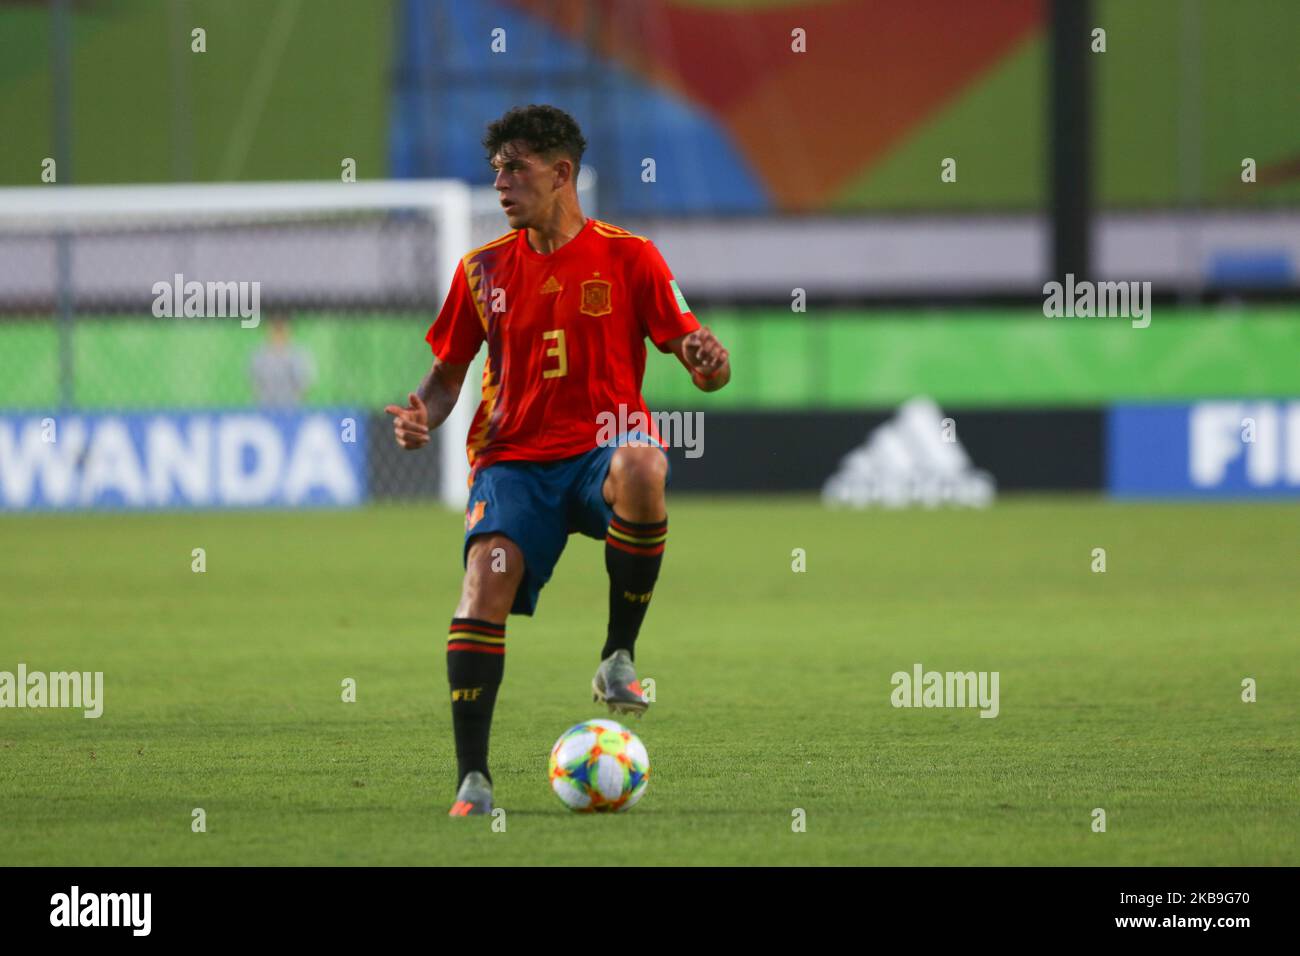 Javier Lopez Carballo of Spain controls the ball during the FIFA U-17 World Cup Brazil 2019 group E match between Spain and Argentina at Estadio Kleber Andrade on October 28, 2019 in Vitoria, Brazil. (Photo by Gilson Borba/NurPhoto) Stock Photo